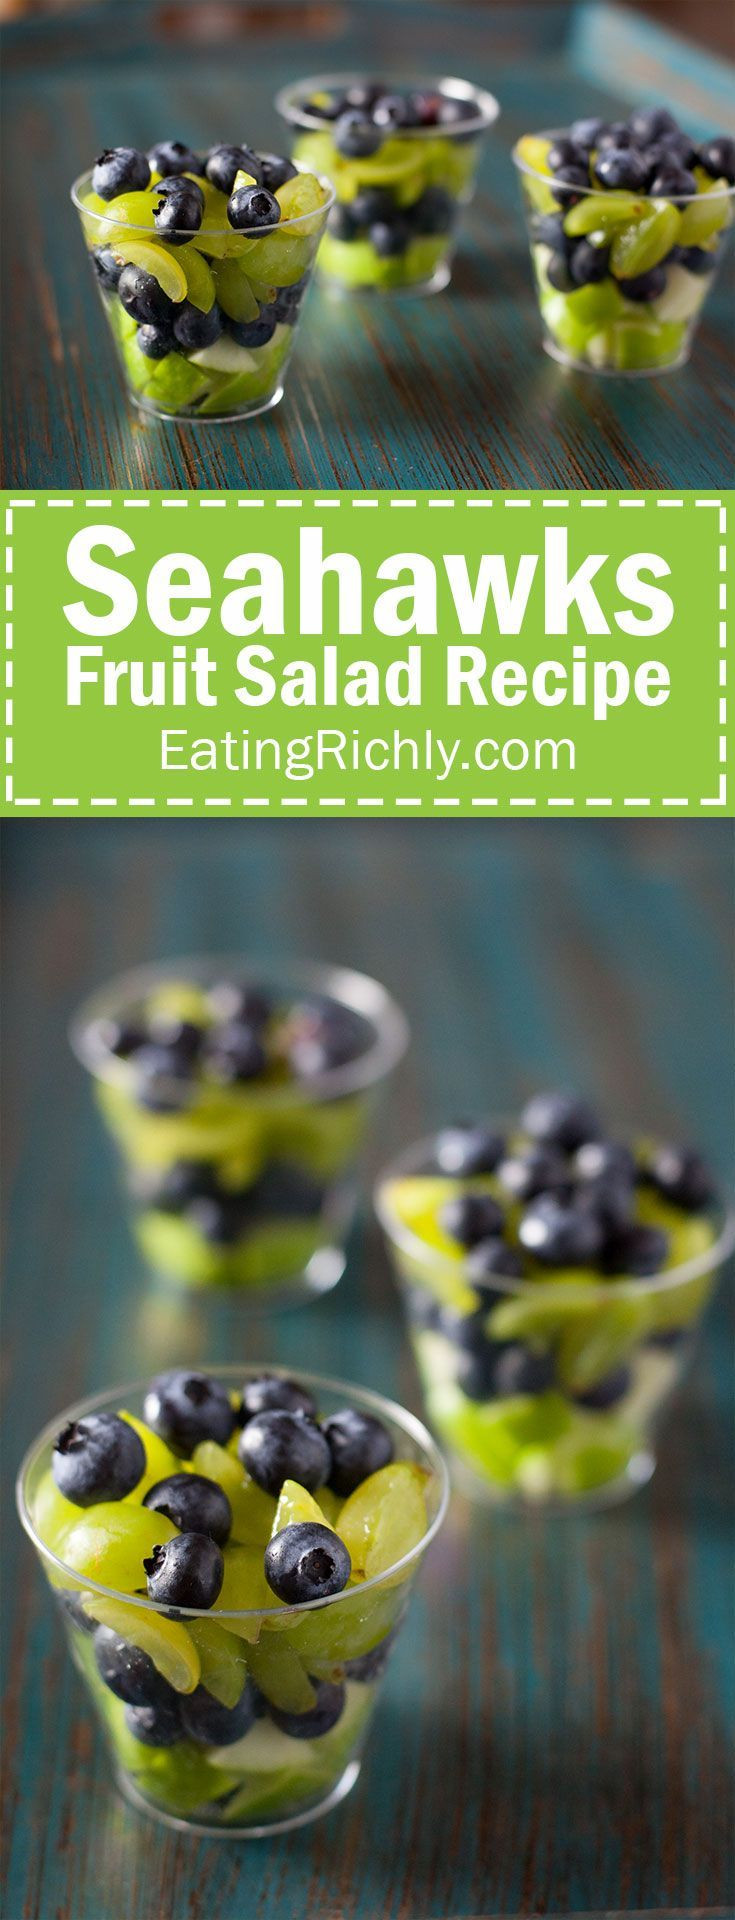 Healthy Football Appetizers
 This fruit salad is a healthy football appetizer that s